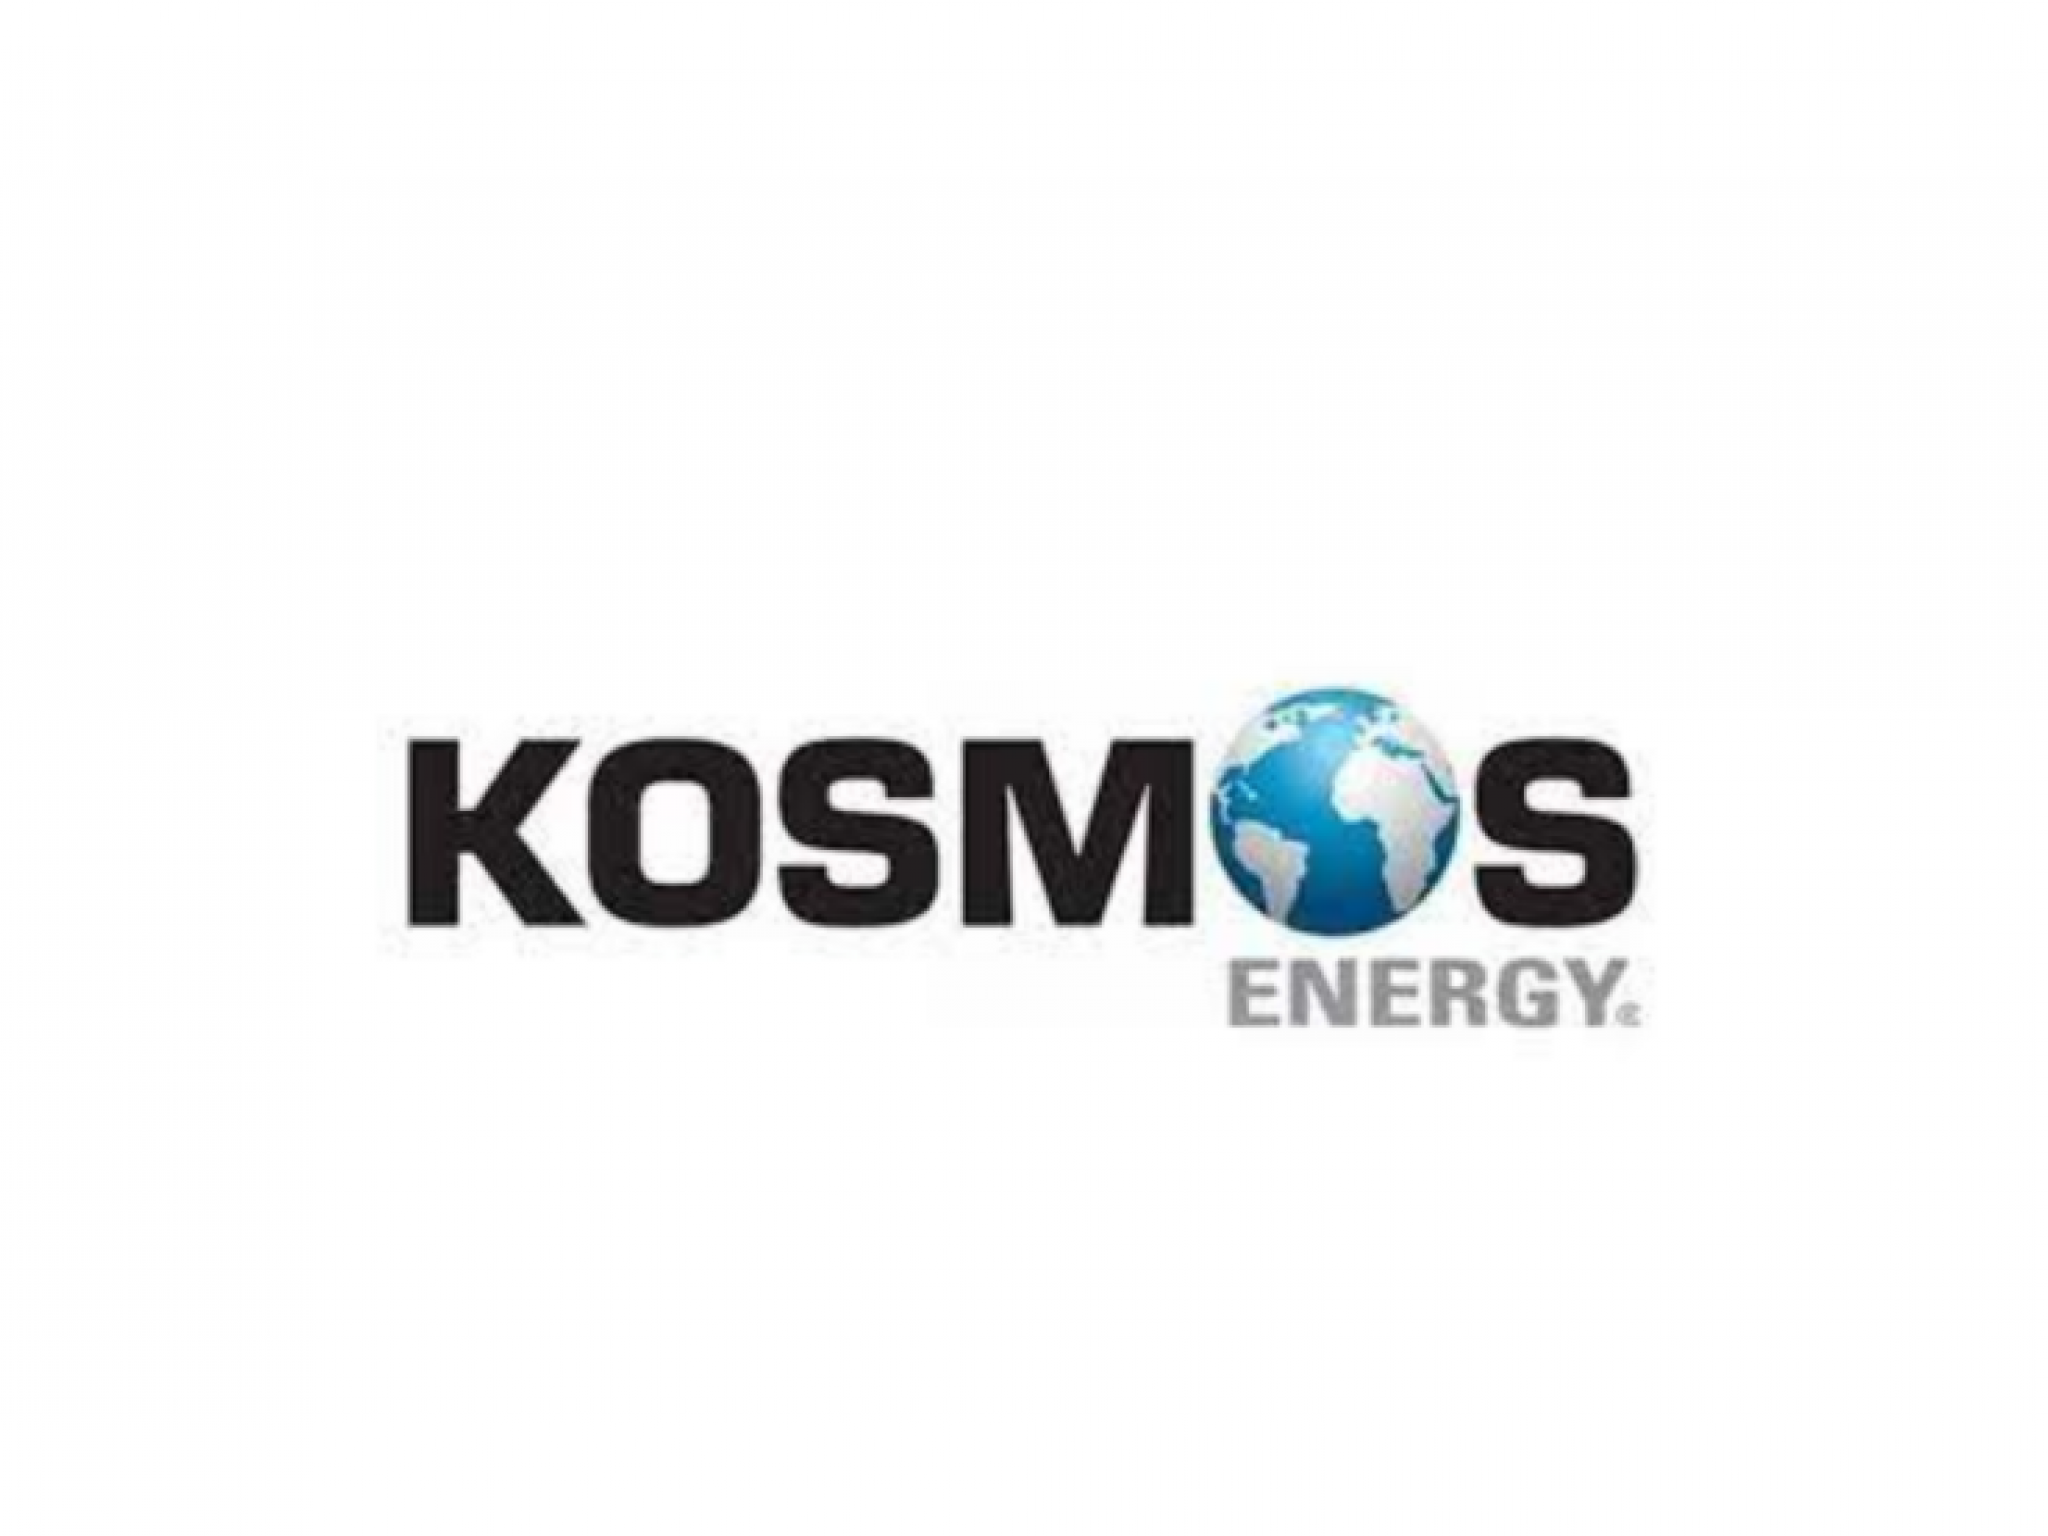  kosmos-energy-outperforms-q4-expectations-amid-production-challenges 